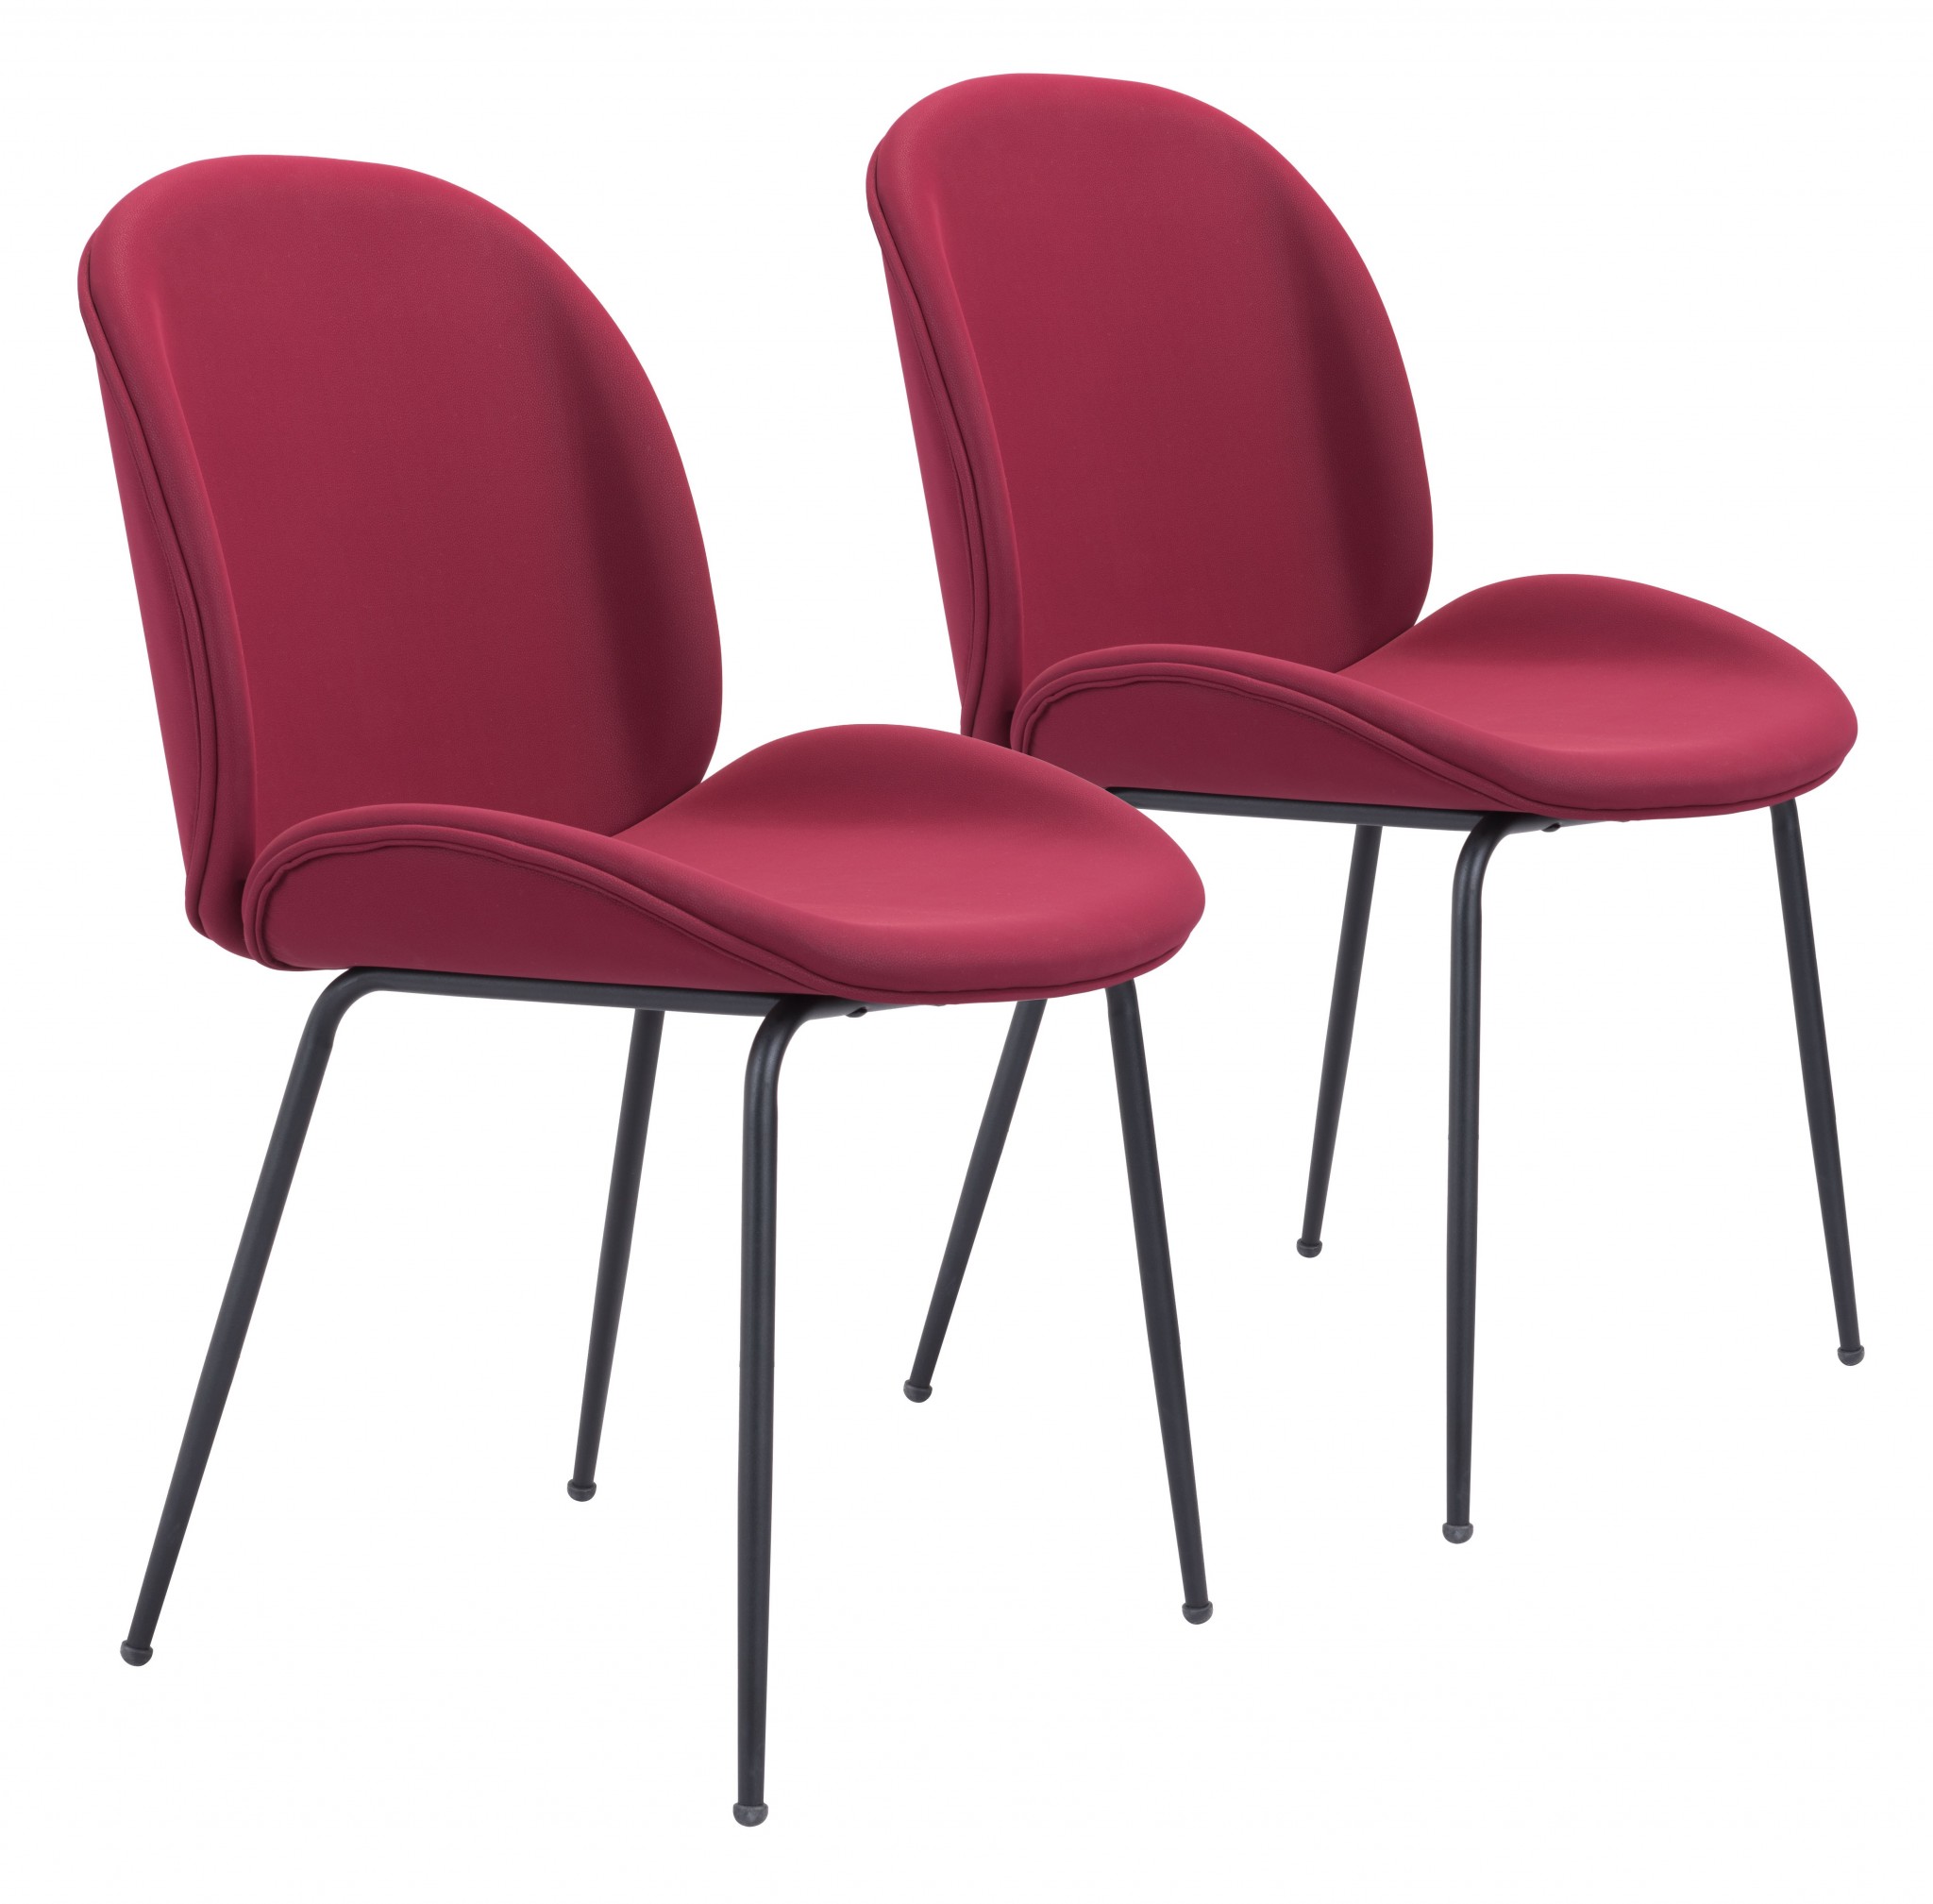 Set of Two Contempo Red Velvet Dining Chairs